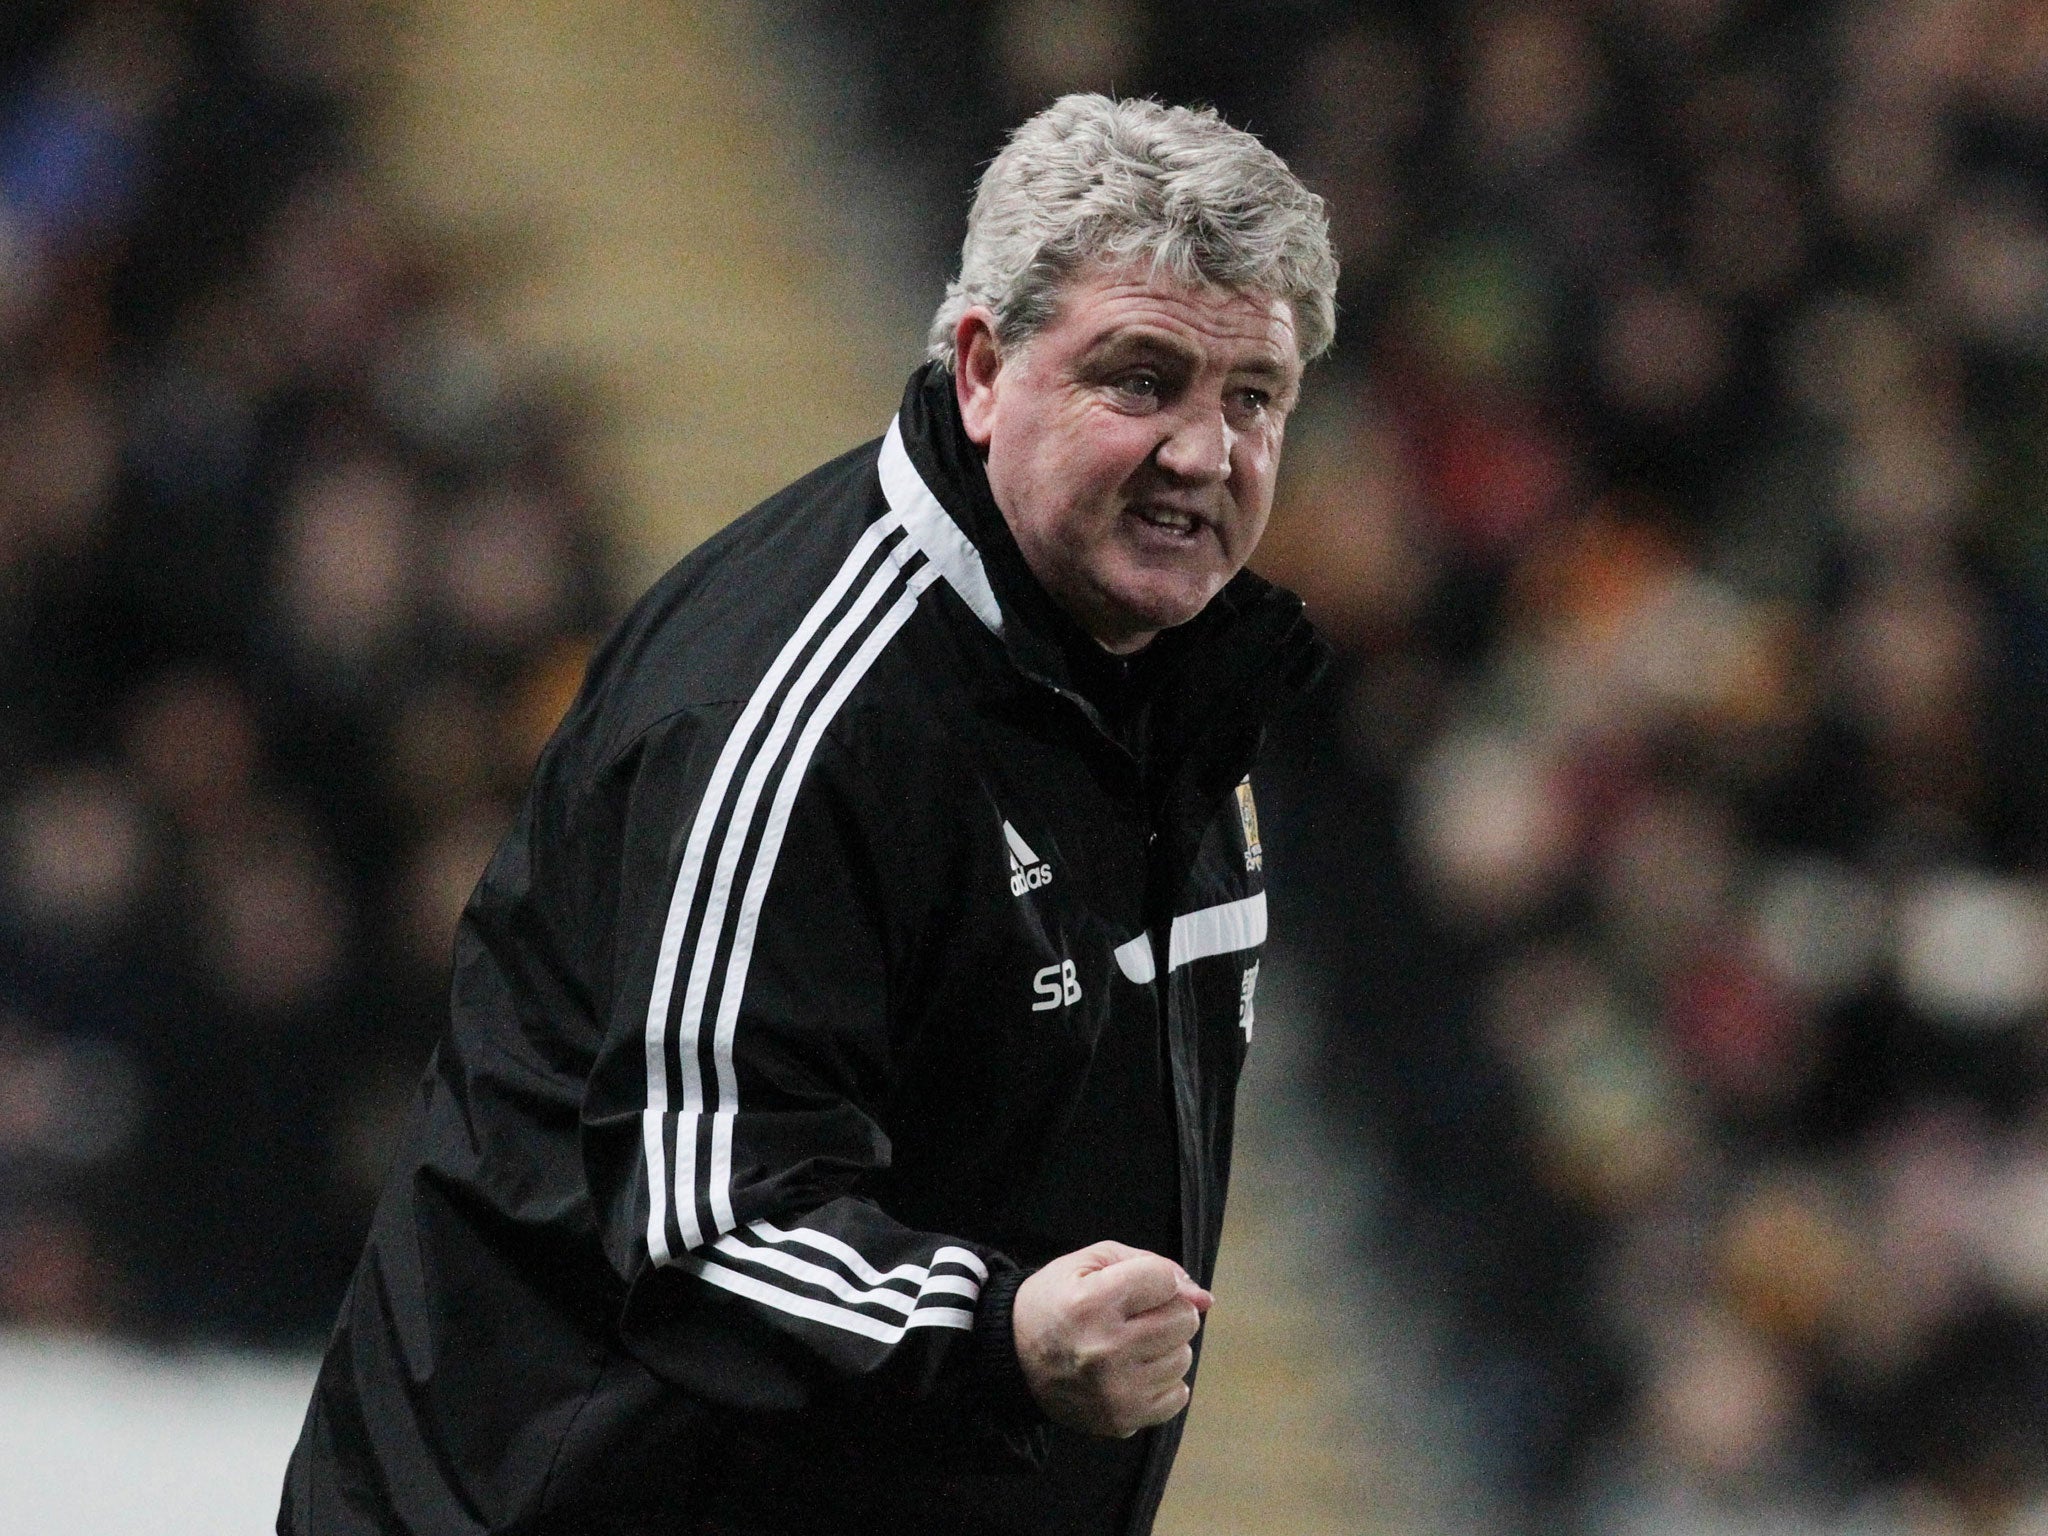 Steve Bruce admitted he was dreaming of FA Cup success after Hull's 2-1 victory over Brighton